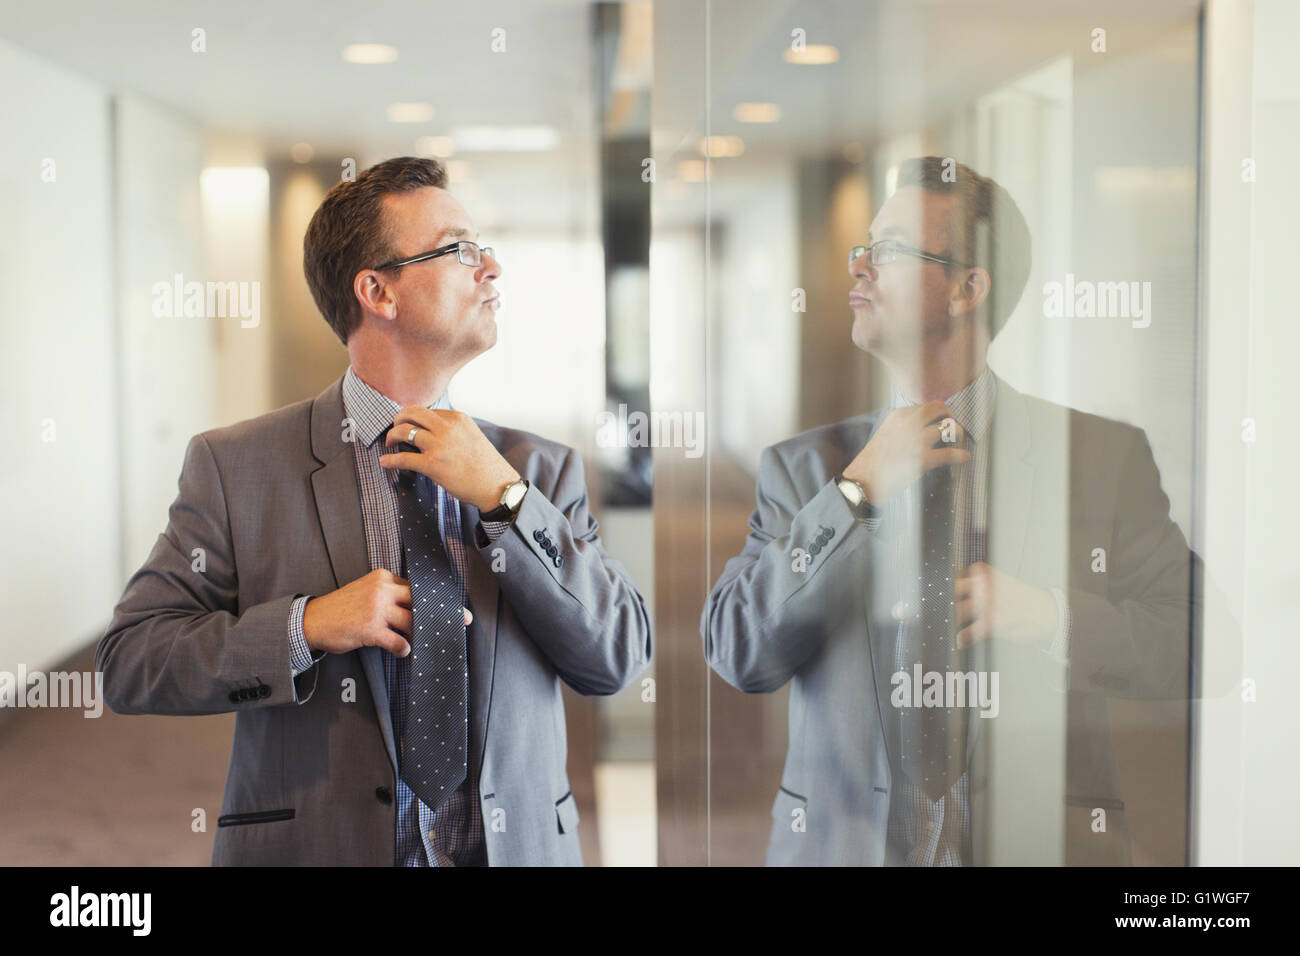 Reflection of confident businessman adjusting tie in office corridor Stock Photo